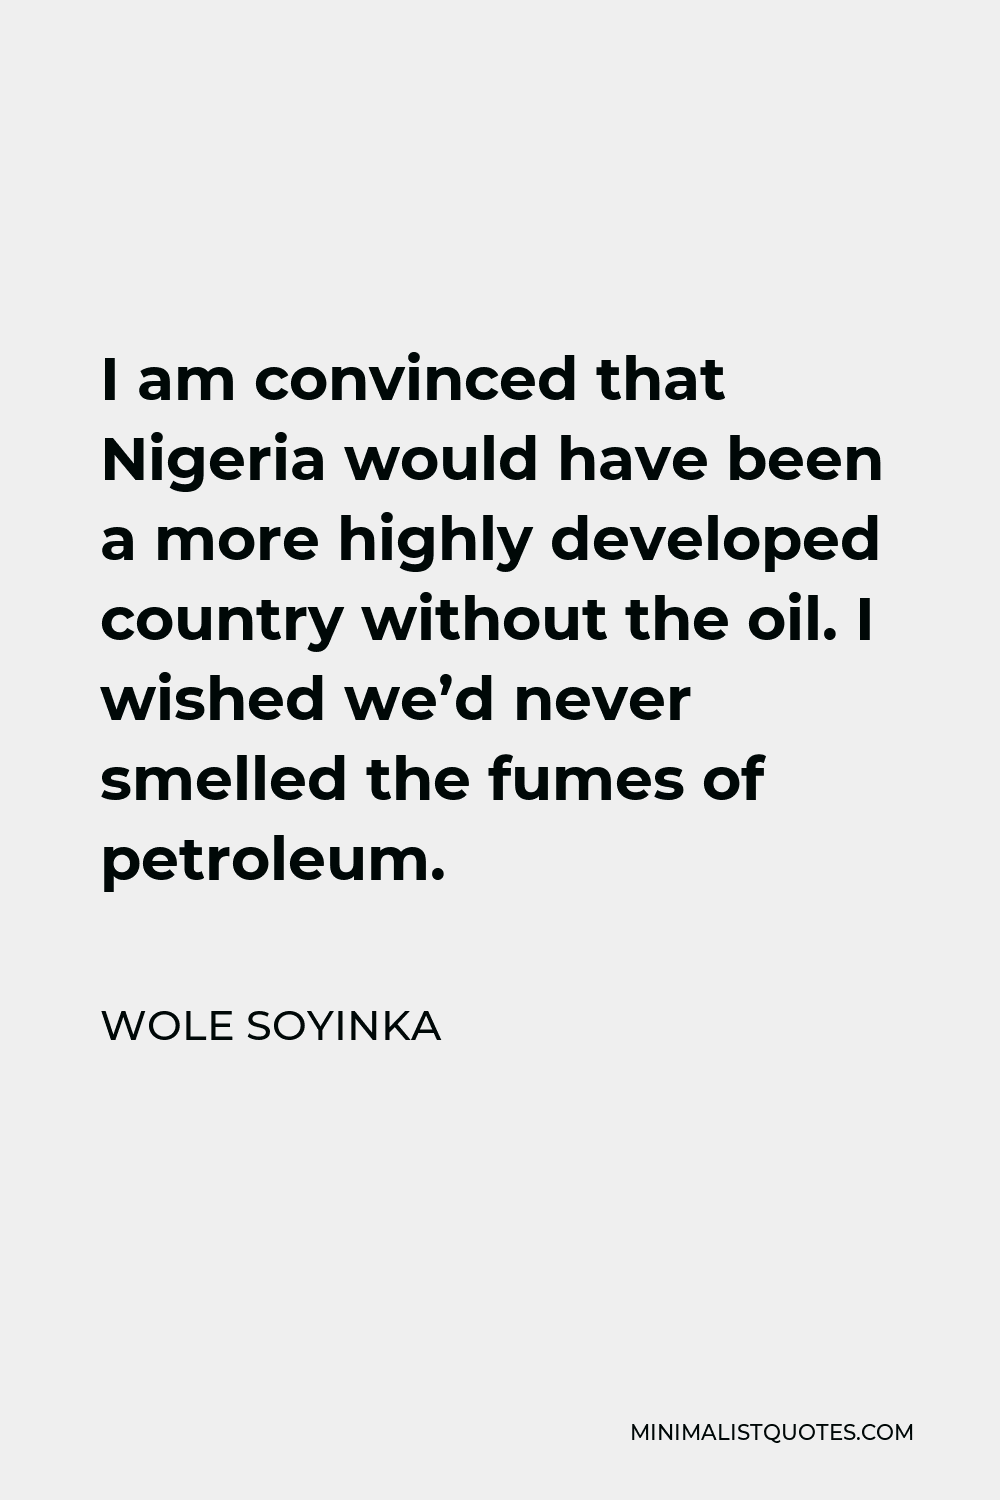 Wole Soyinka Quote - I am convinced that Nigeria would have been a more highly developed country without the oil. I wished we’d never smelled the fumes of petroleum.